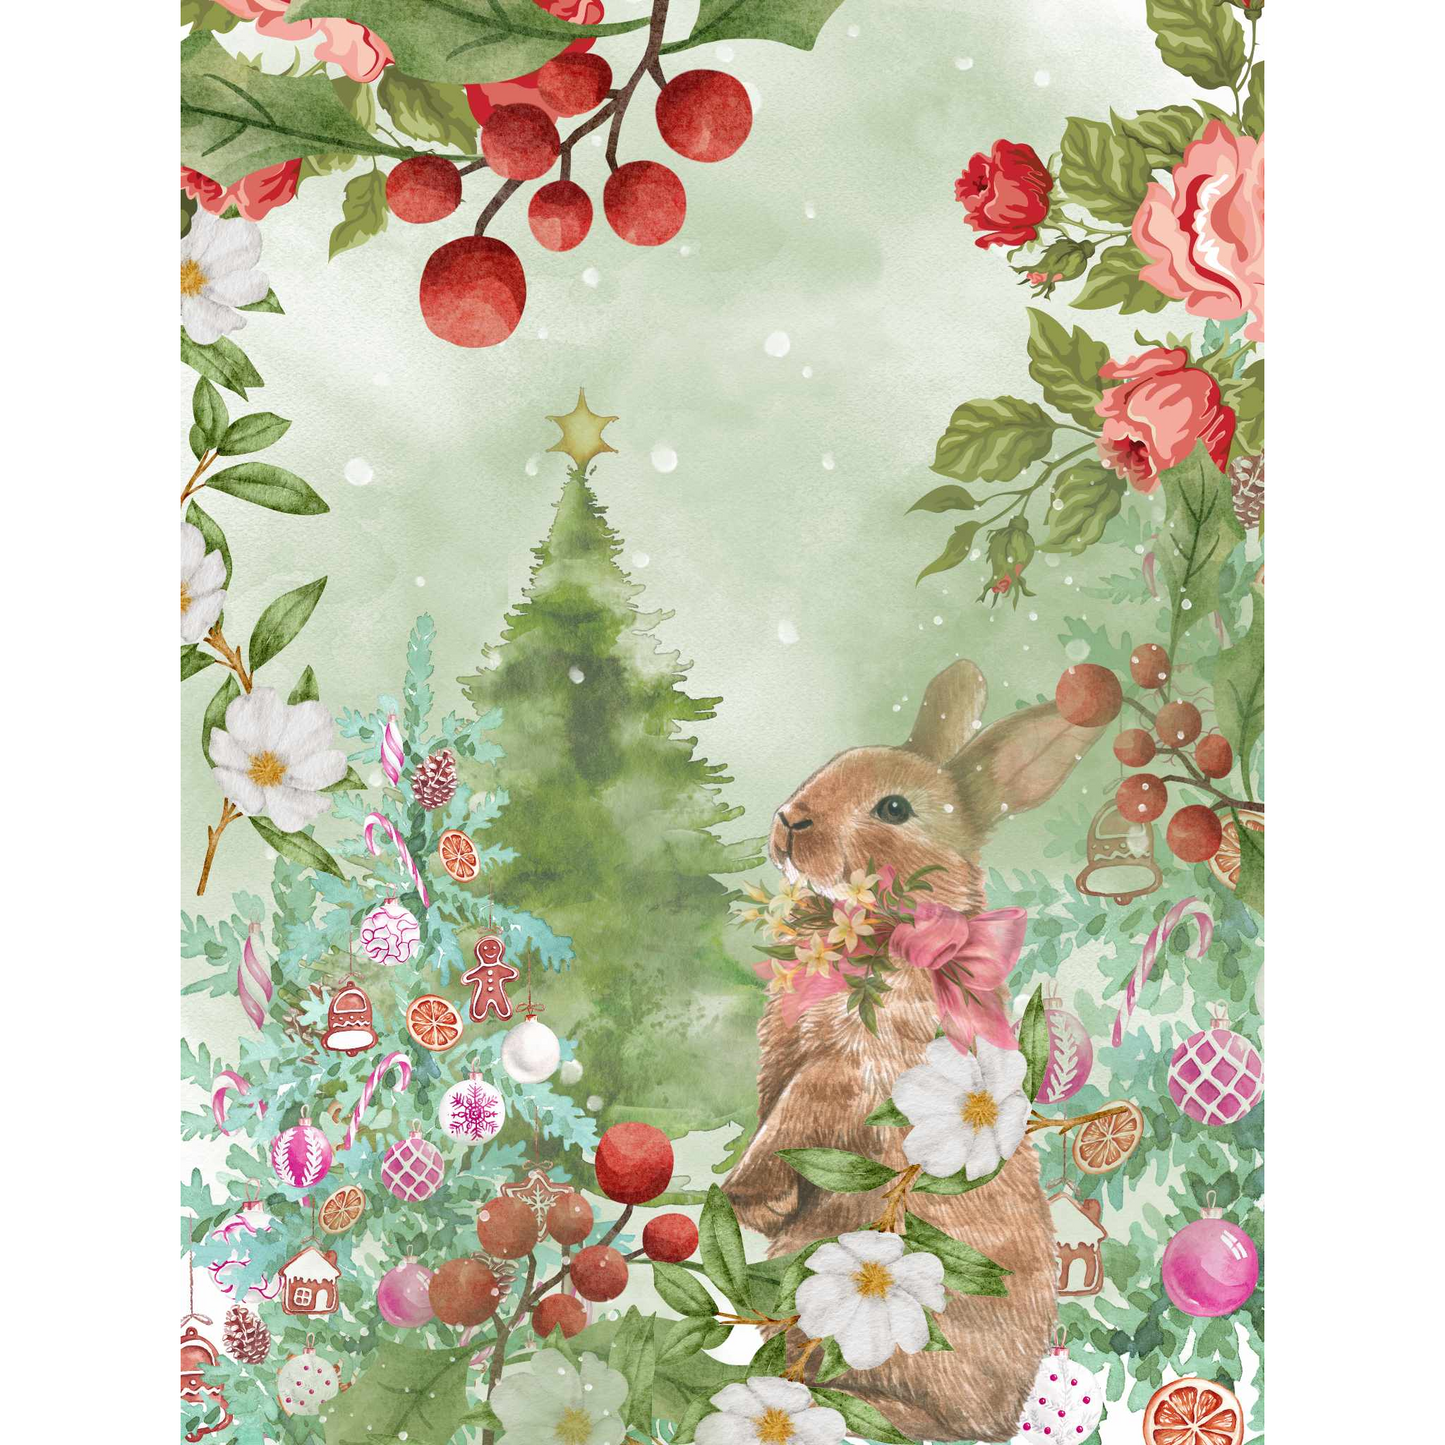 "Floral Holiday" 3 sheet decoupage paper set by Made by Marley. Sheet 3 of 3. Available at Milton's Daughter.